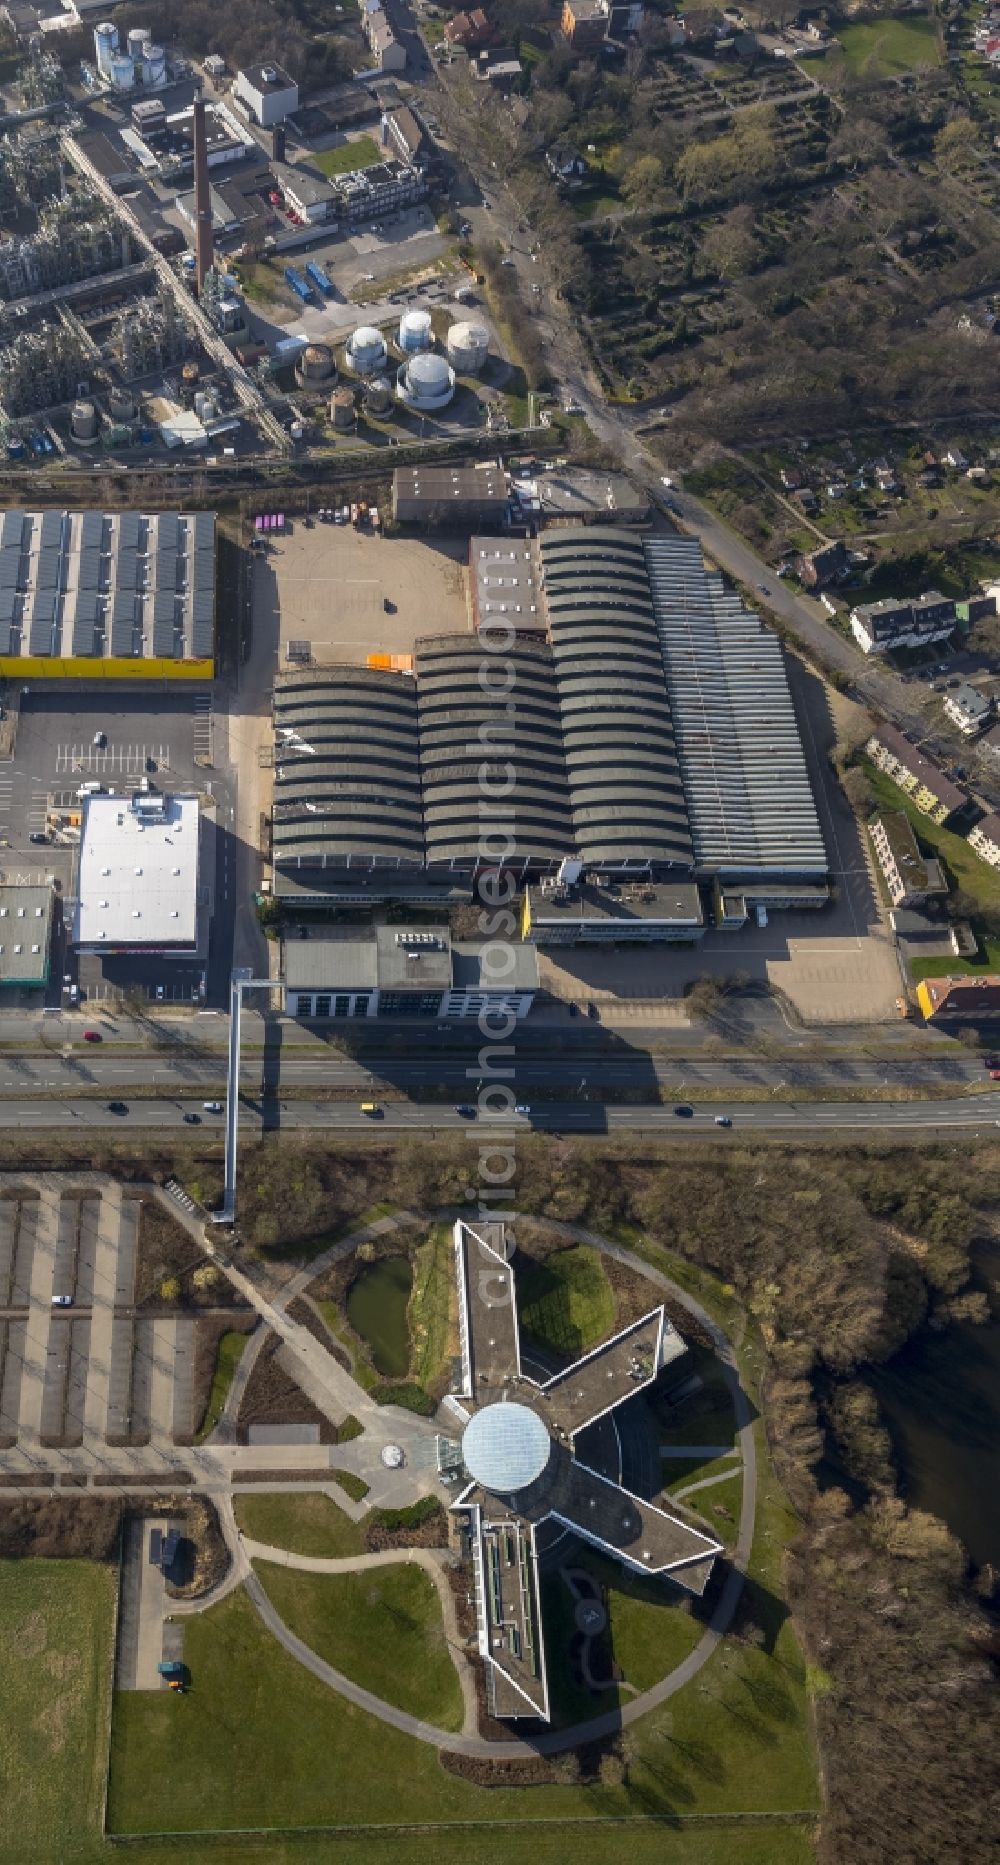 Bochum from the bird's eye view: Building the GEA headquarters in Hamme a district of Bochum in North Rhine-Westphalia